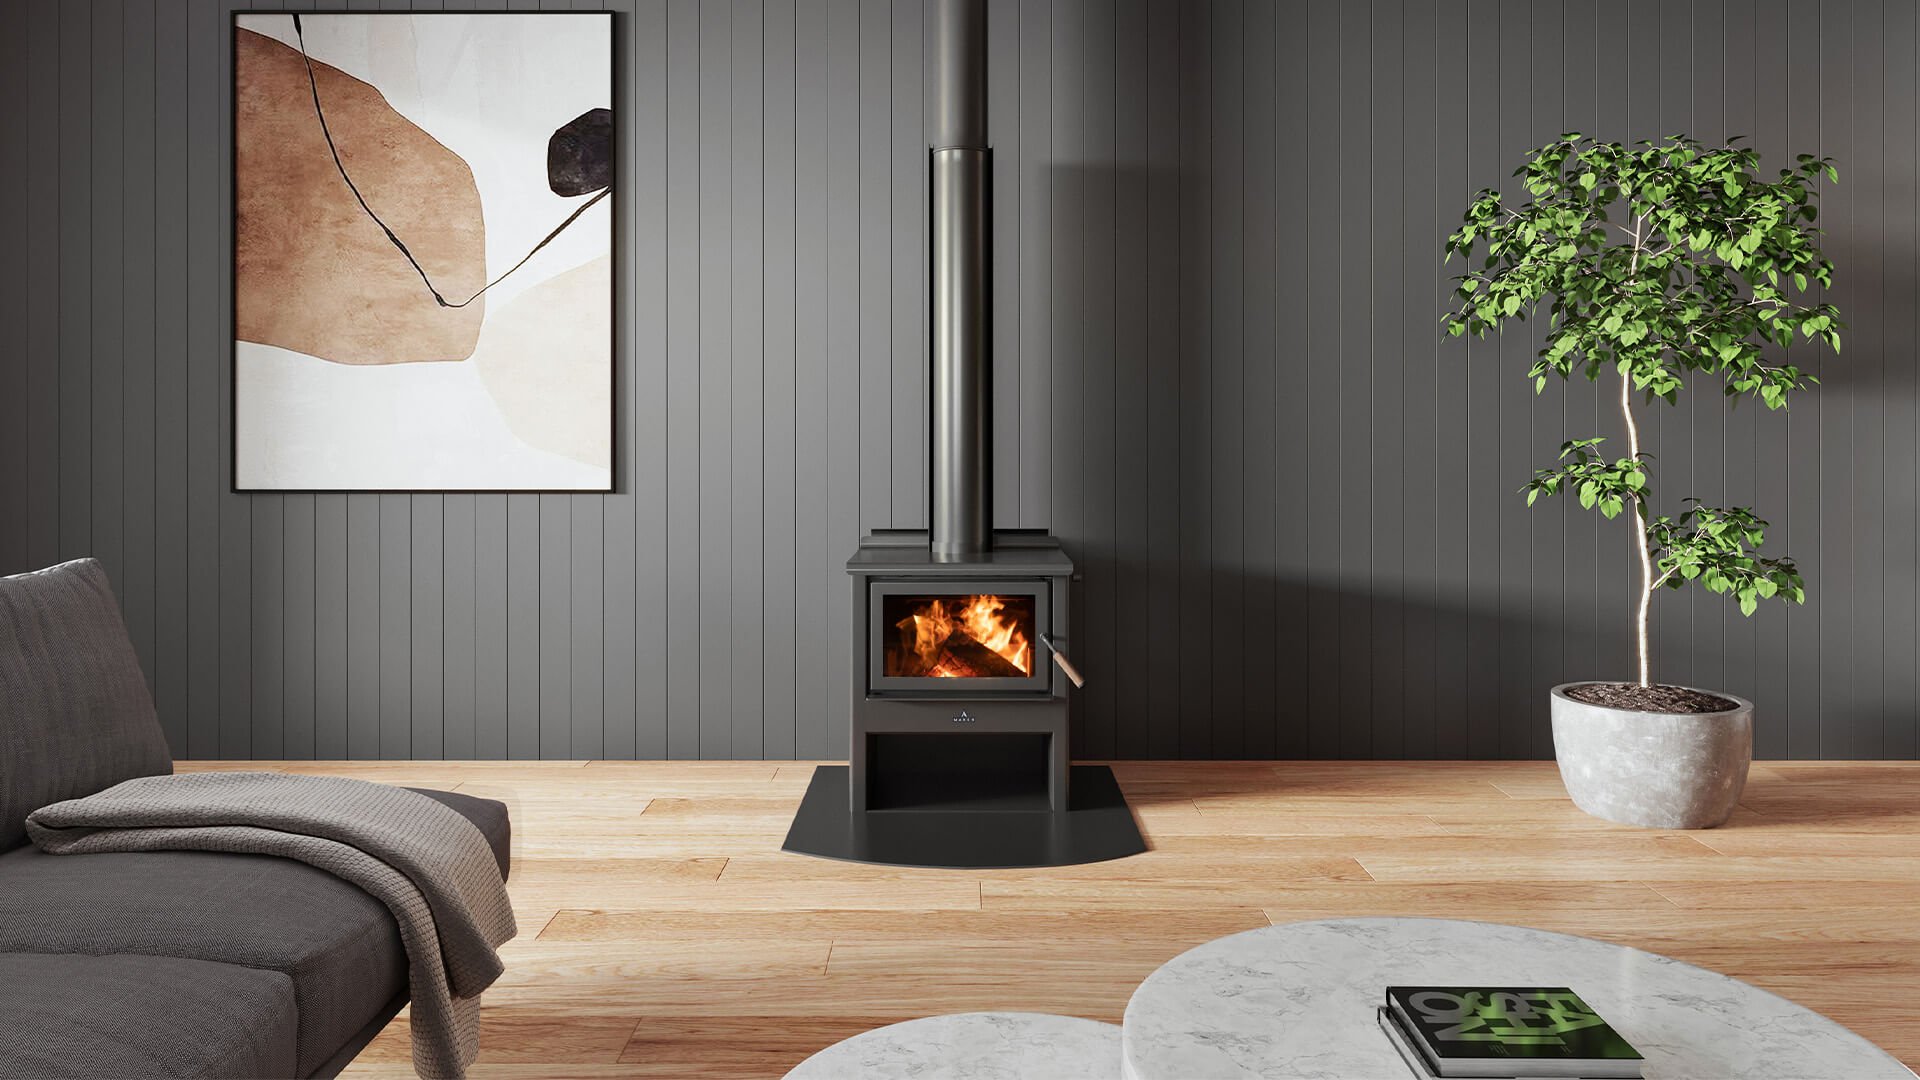 Maxen Kinmont 350 with Wood Stacker Base Wood Fireplace in living room